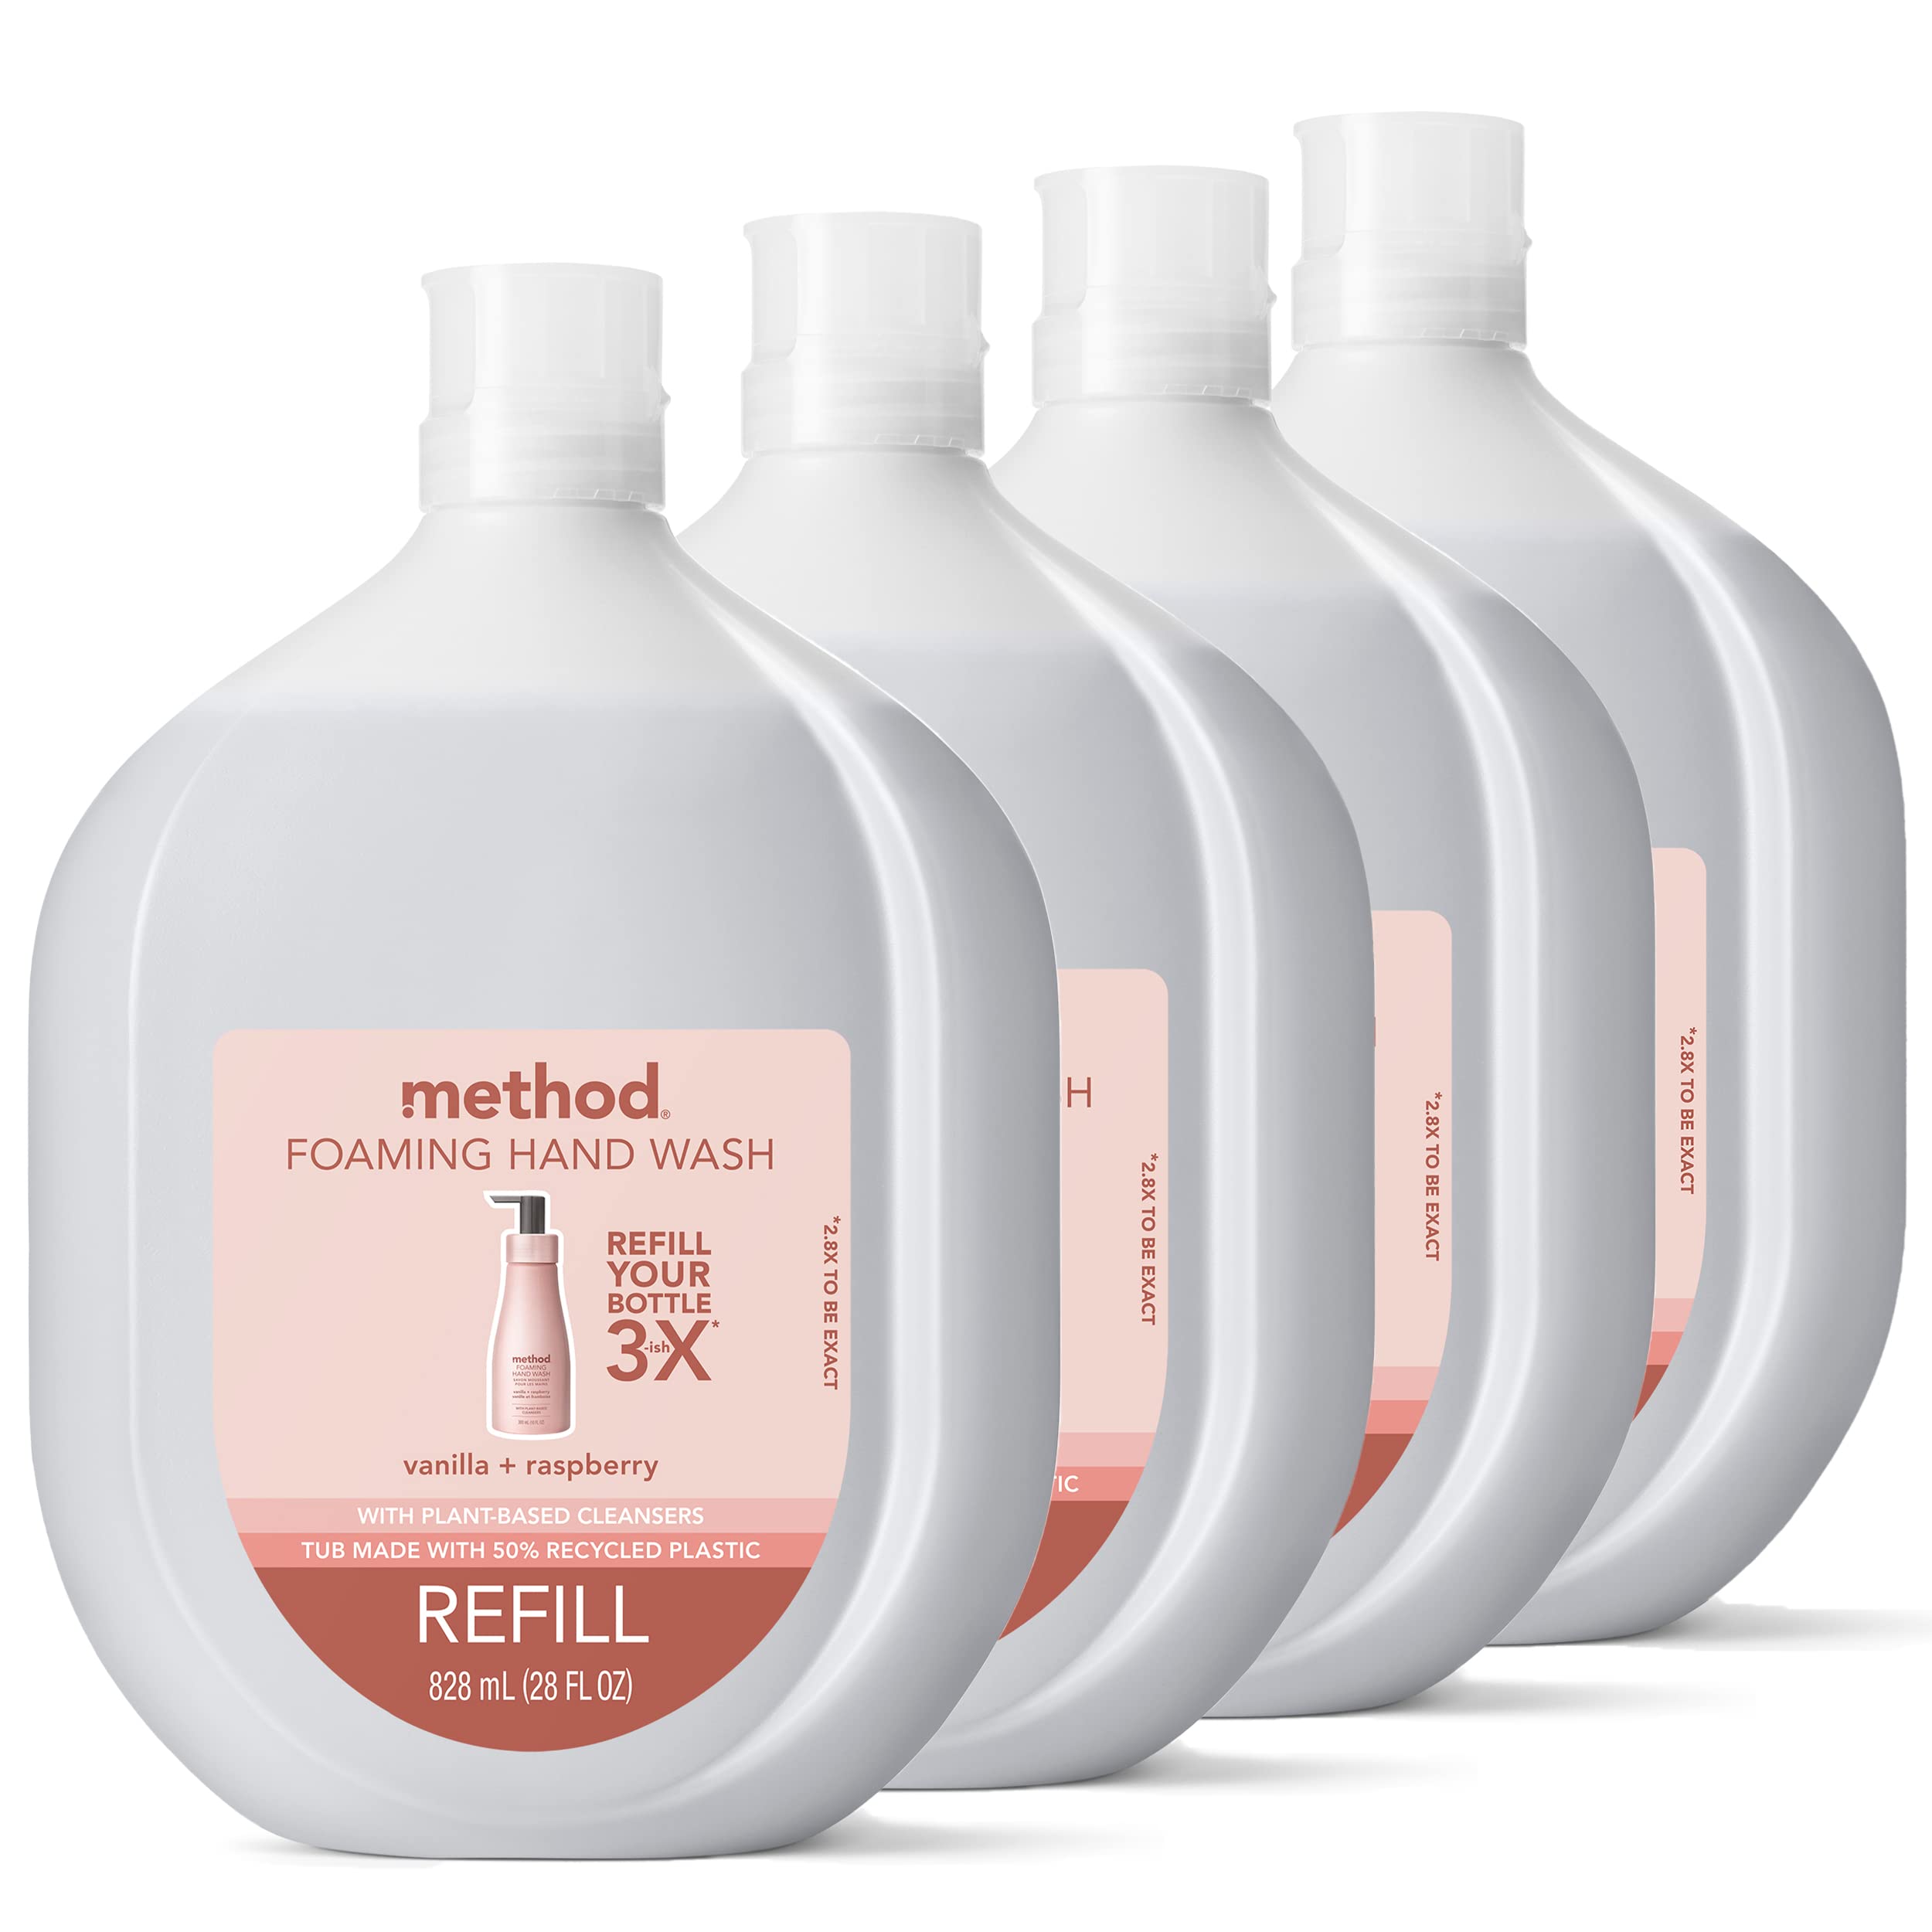 Method biodegradable French Lavender All-Purpose Cleaner 28 fl